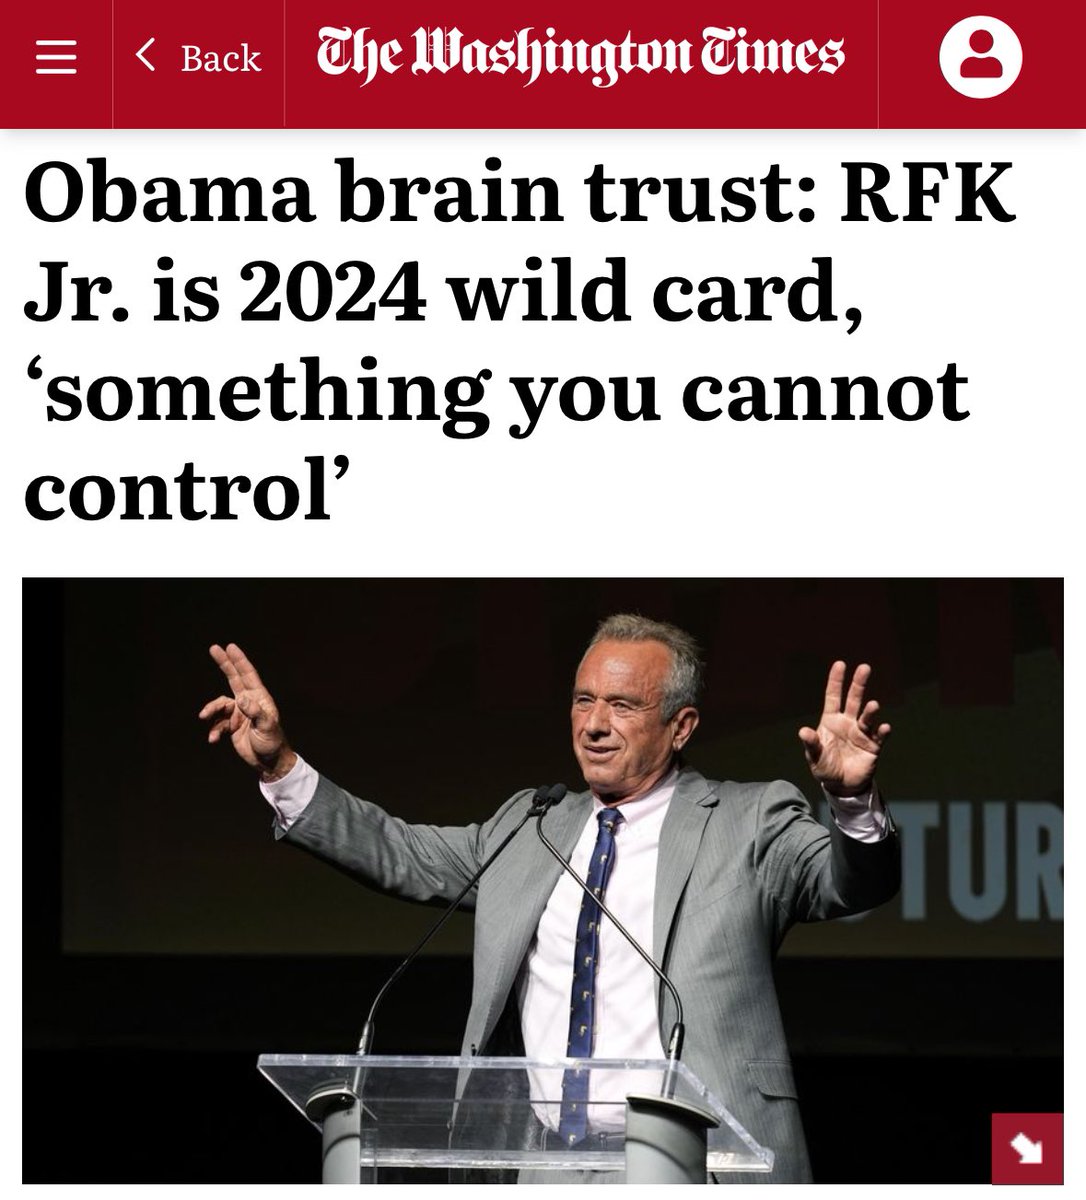 RFK Jr. is a 2024 wild card who is keeping Biden and Trump “up at night,” says Obama 2012 campaign chairman Jim Messina “There are some things you can’t control, and let’s be honest, RFK Jr. is something you cannot control”